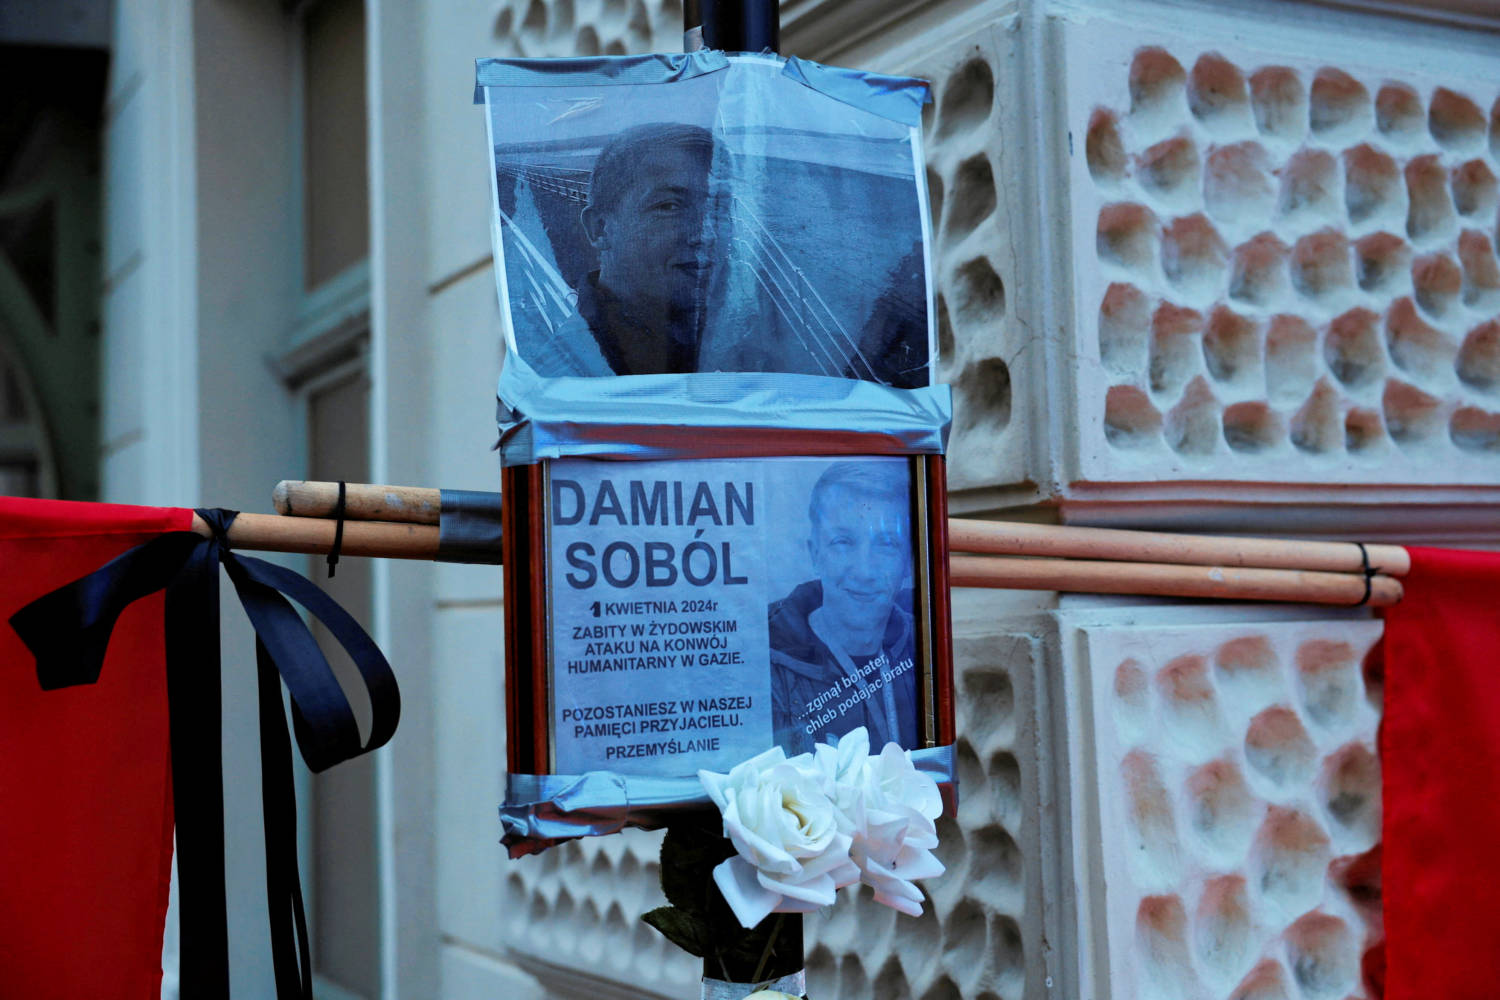 Mourners Gather To Hold A Vigil For The Polish Aid Worker Damian Sobol Who Was Killed By The Israeli Army In Gaza, In Przemysl